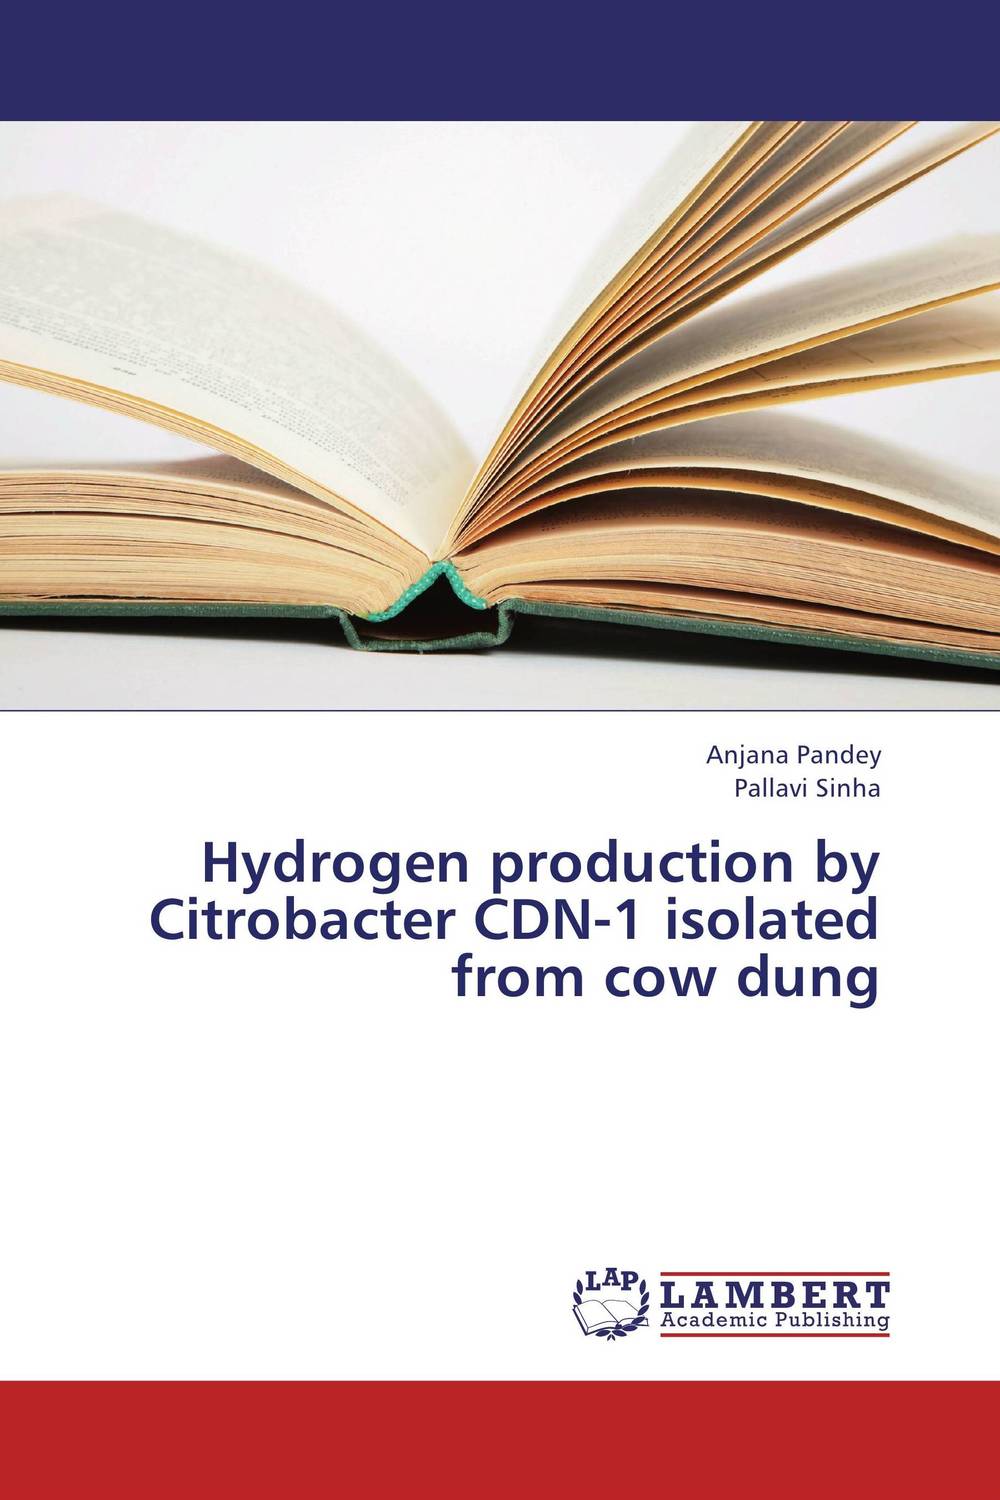 Hydrogen production by Citrobacter CDN-1 isolated from cow dung